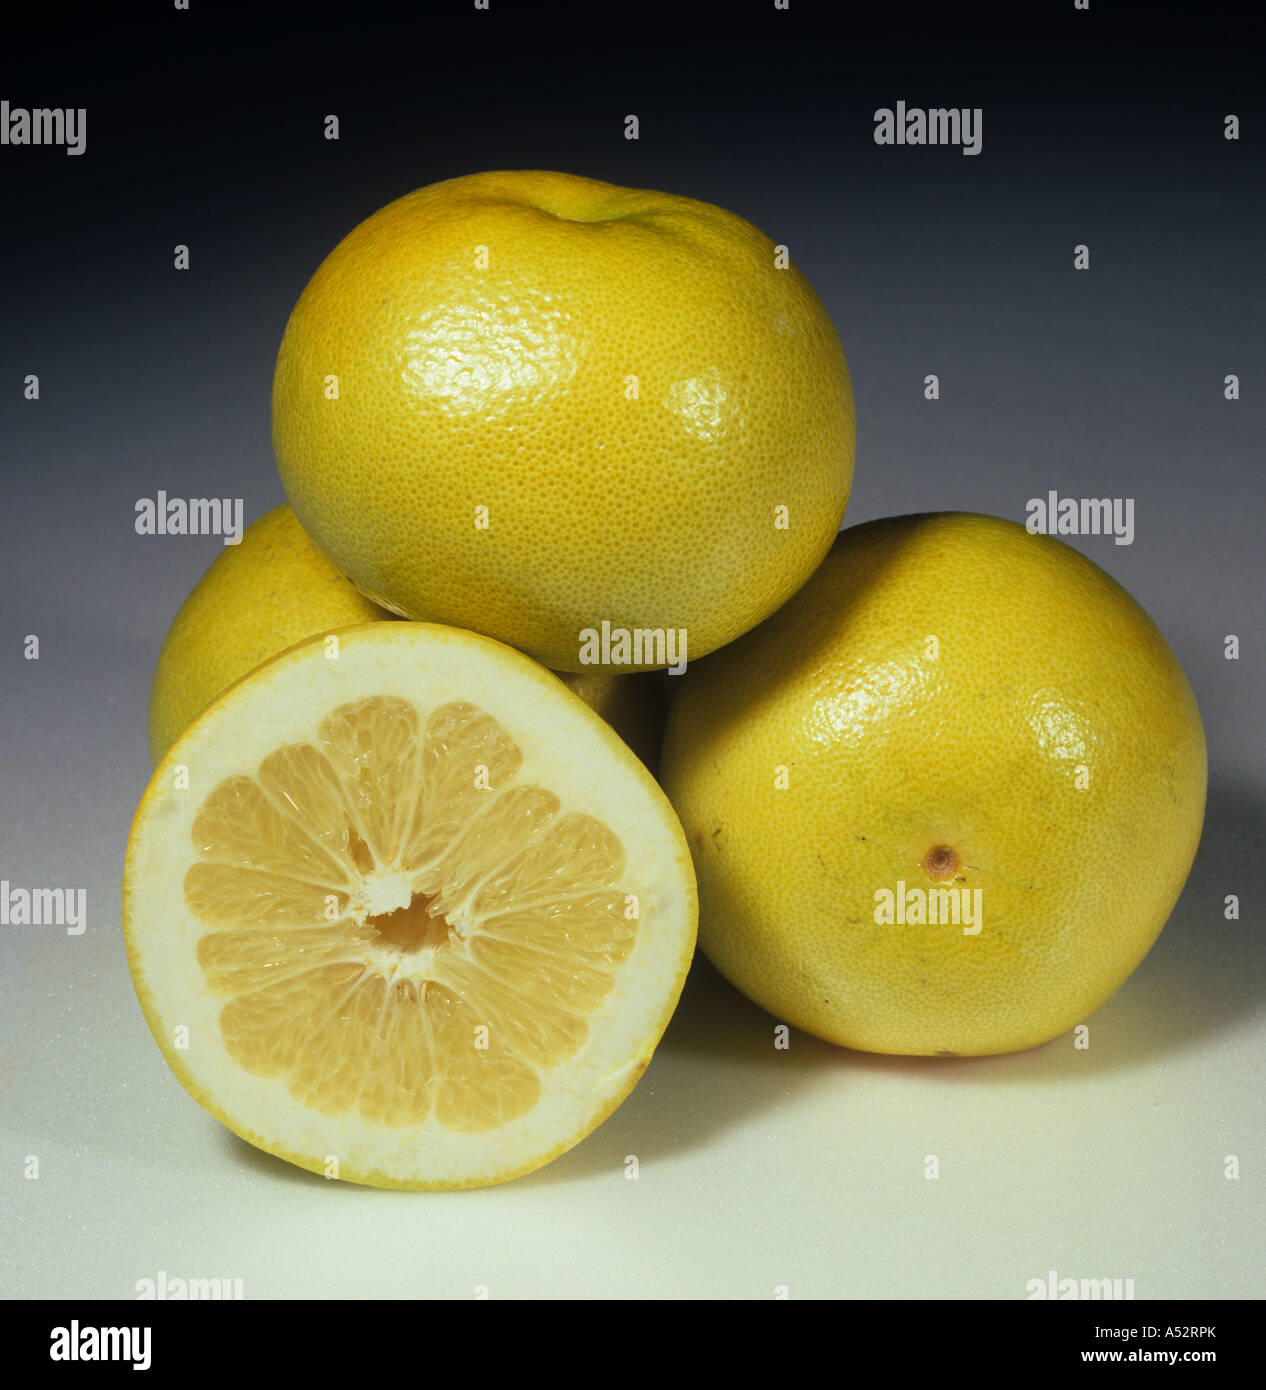 Whole sectioned fruit from a hybrid between a pummelo x grapefruit variety Orobanco or Sweetie Stock Photo